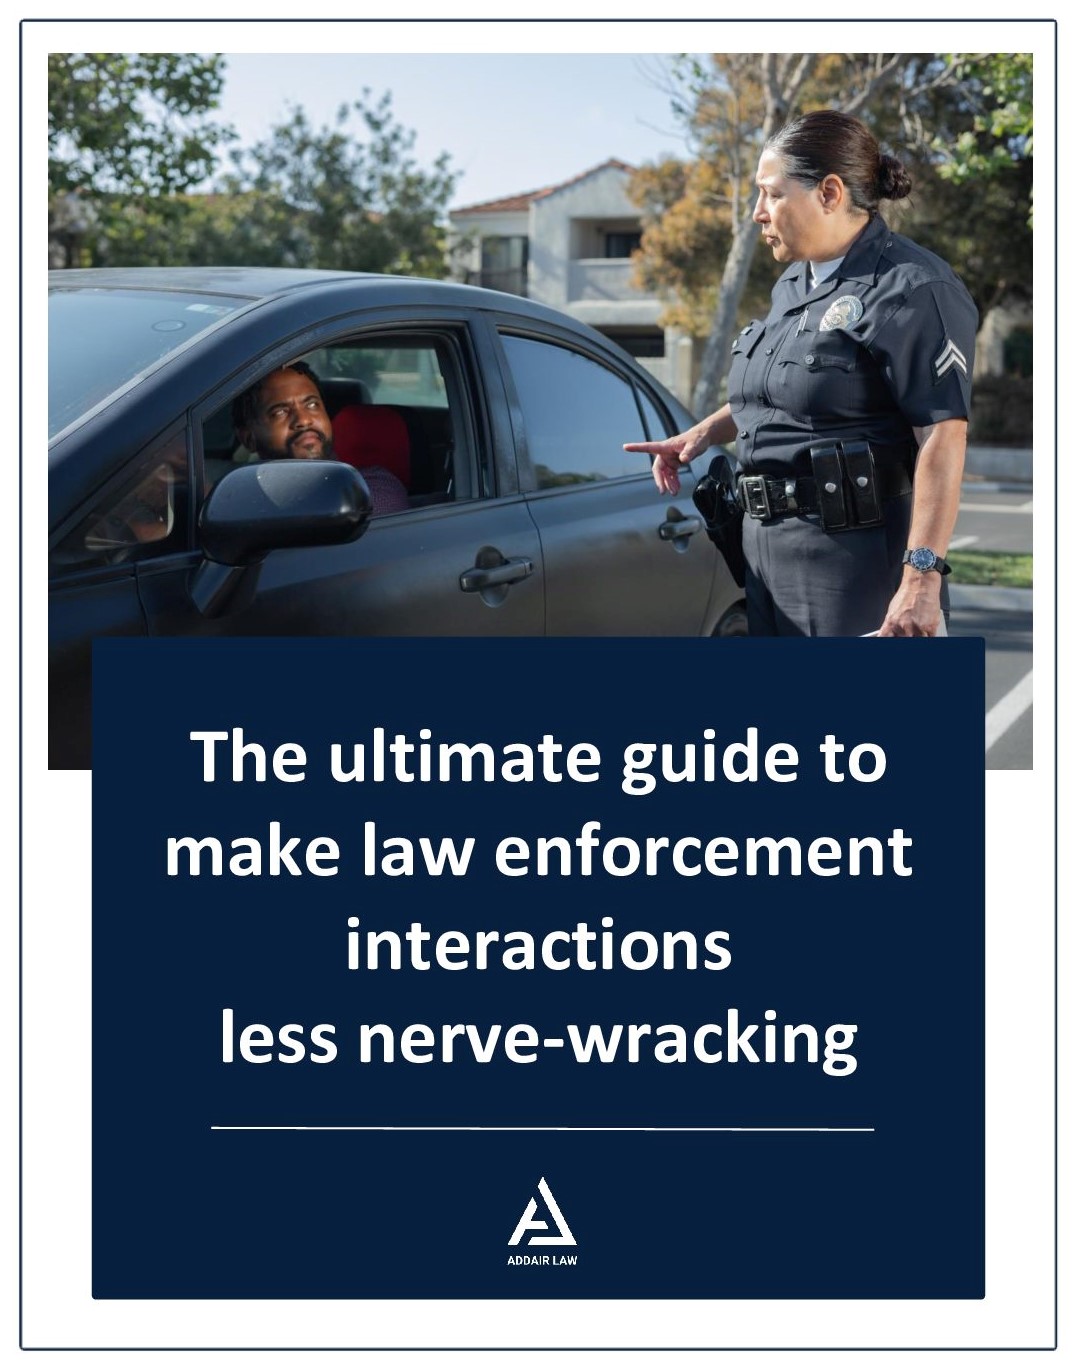 The ultimate guide to make law enforcement interactions less nerve-wracking ebook cover